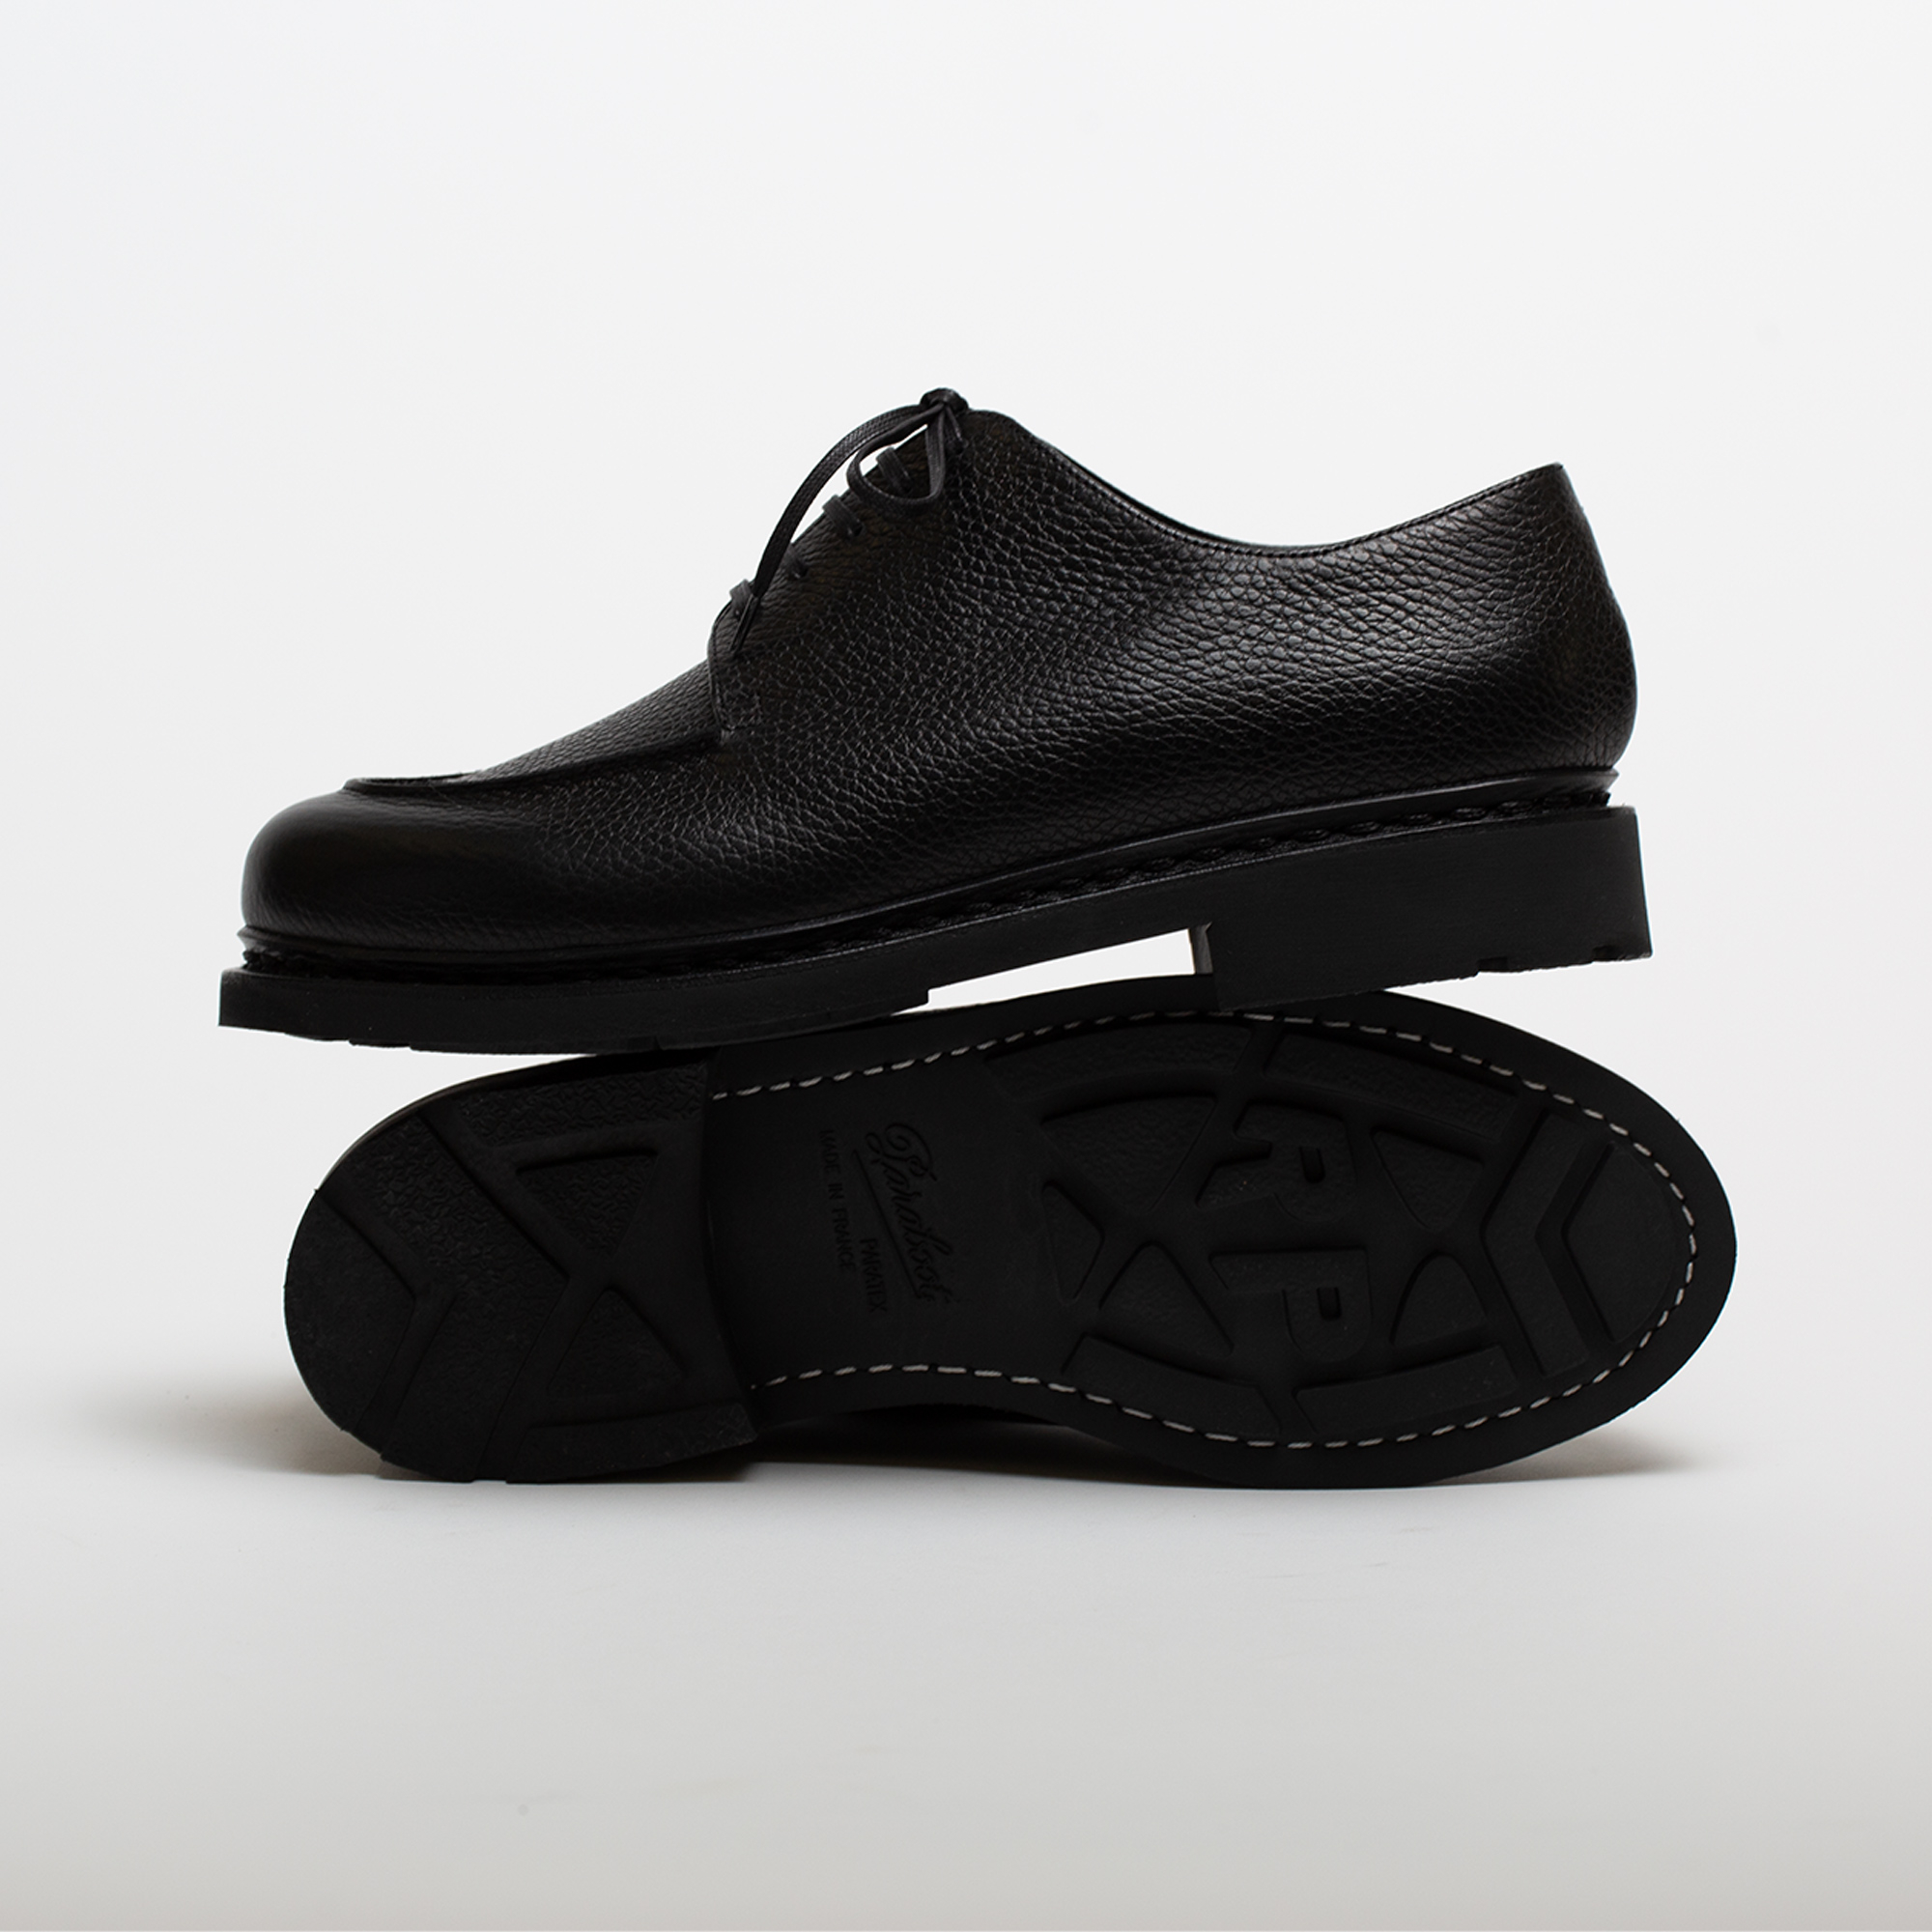 MIRAGE shoes in Black color by Paraboot for Arpenteur